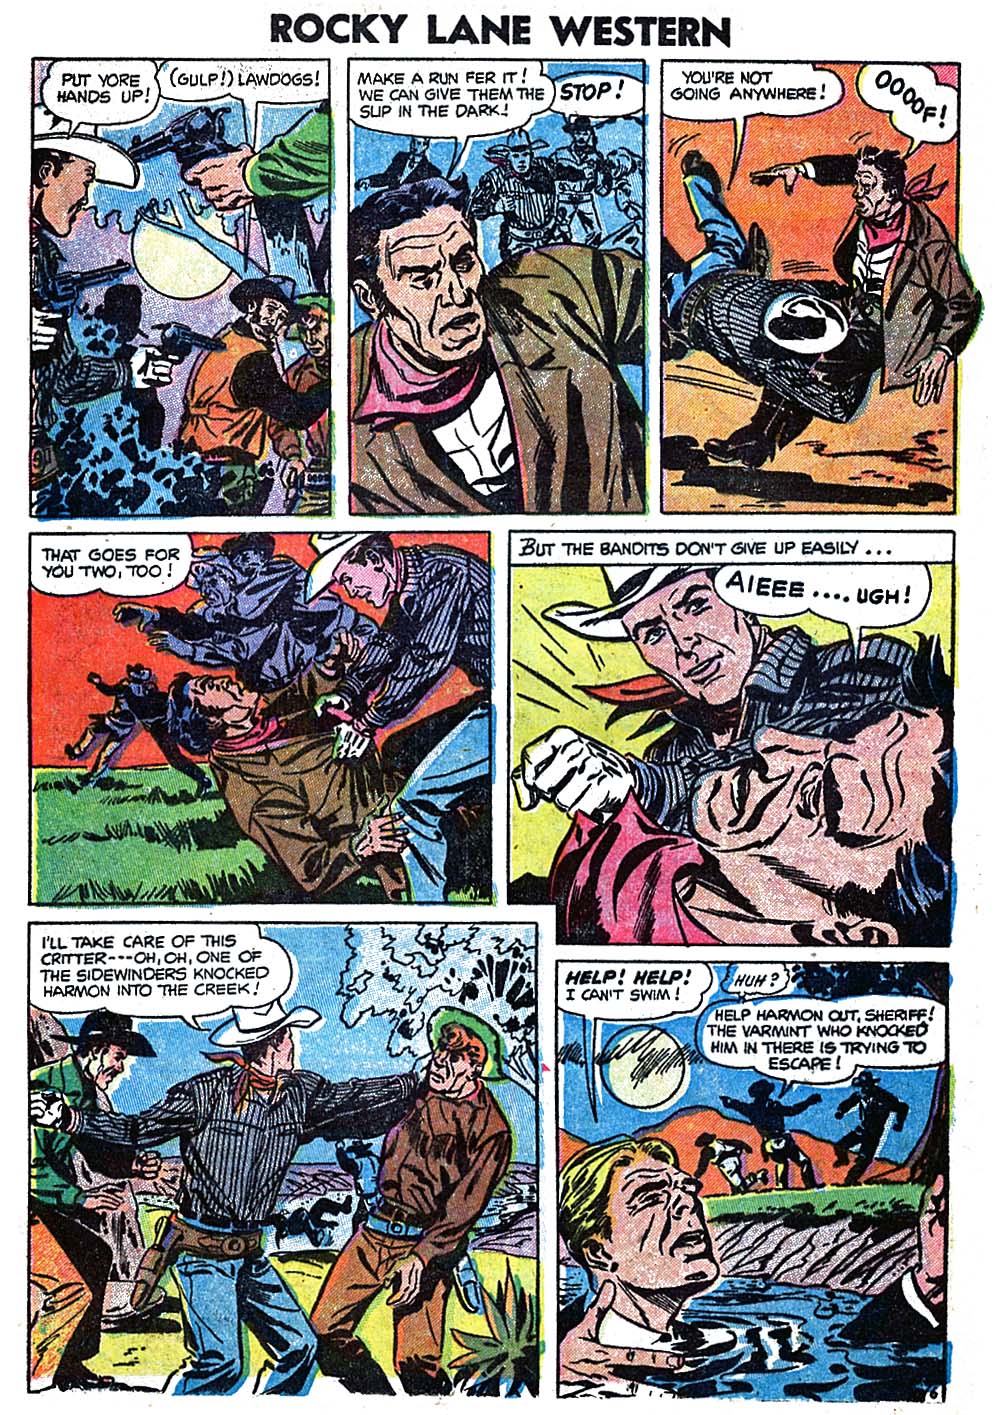 Rocky Lane Western (1954) issue 60 - Page 7